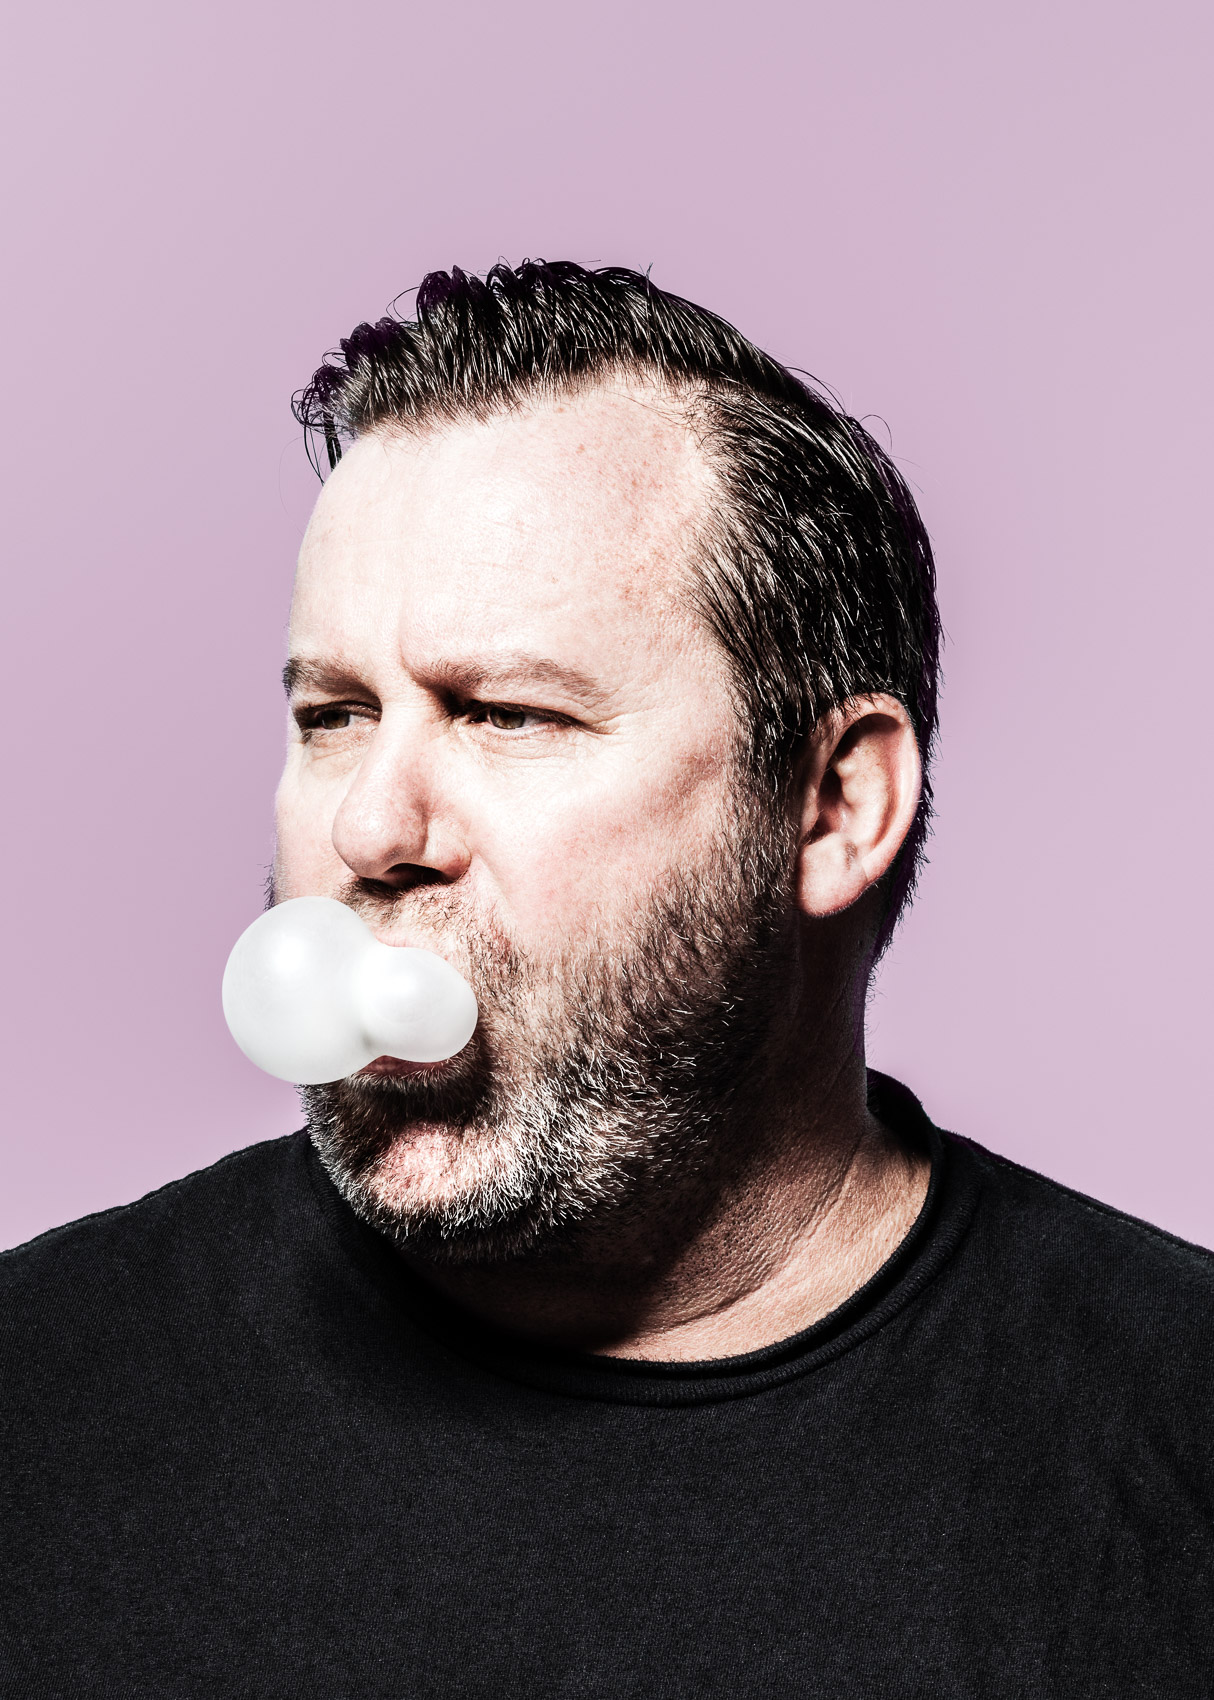 Bubbleman | Los Angeles | Editorial and Commercial Photographer Patrick Strattner